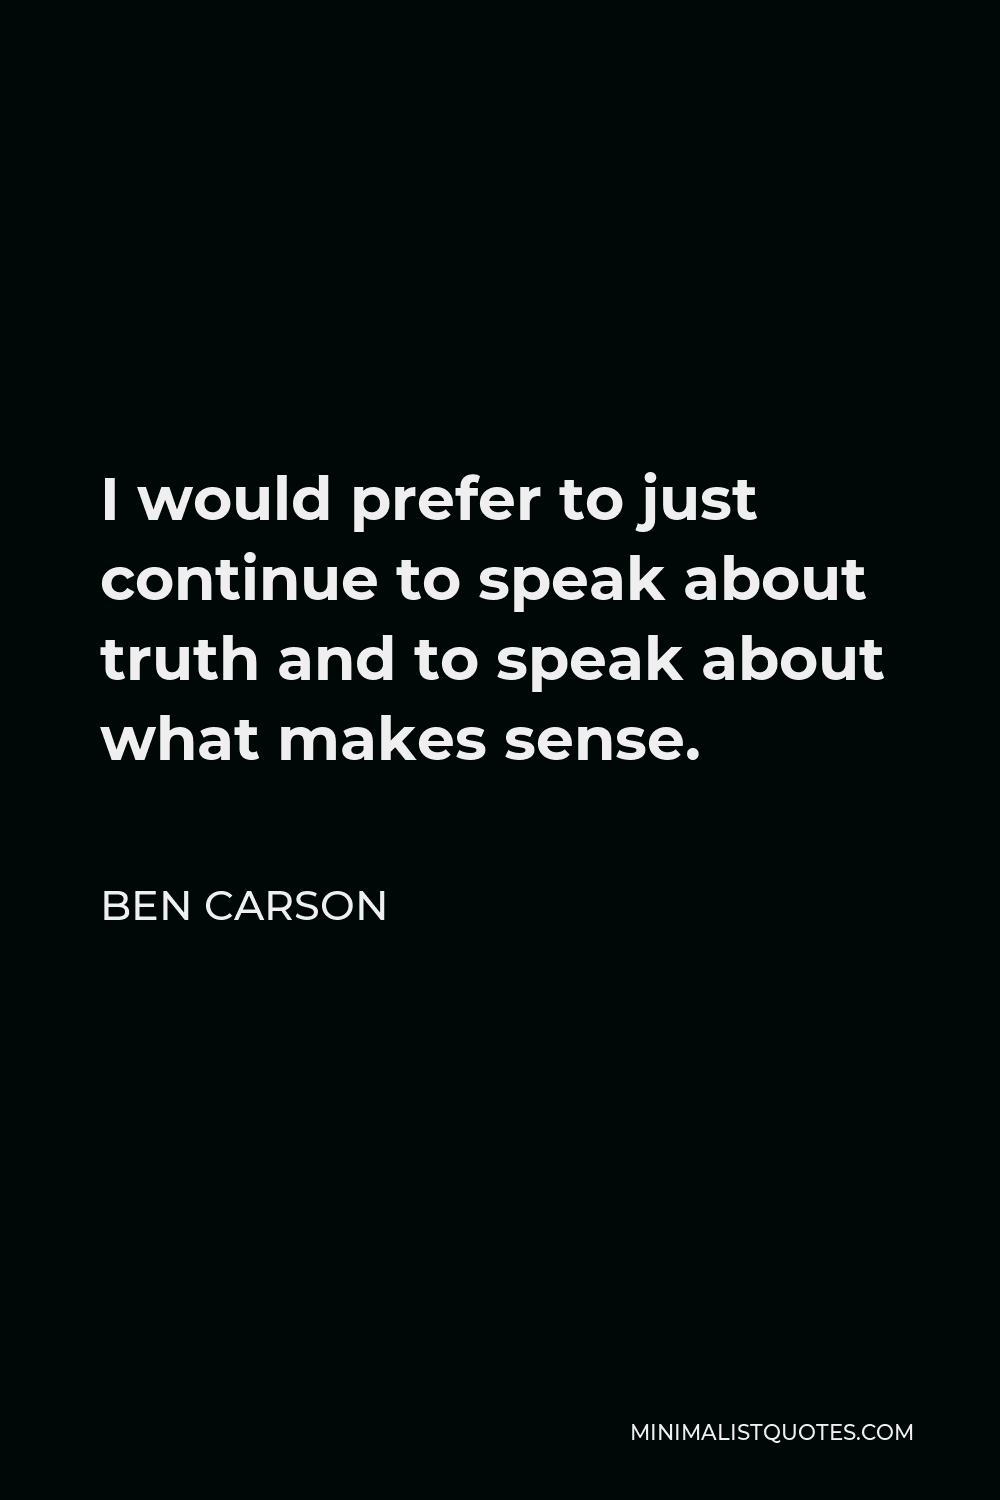 Ben Carson Quote - I would prefer to just continue to speak about truth and to speak about what makes sense.